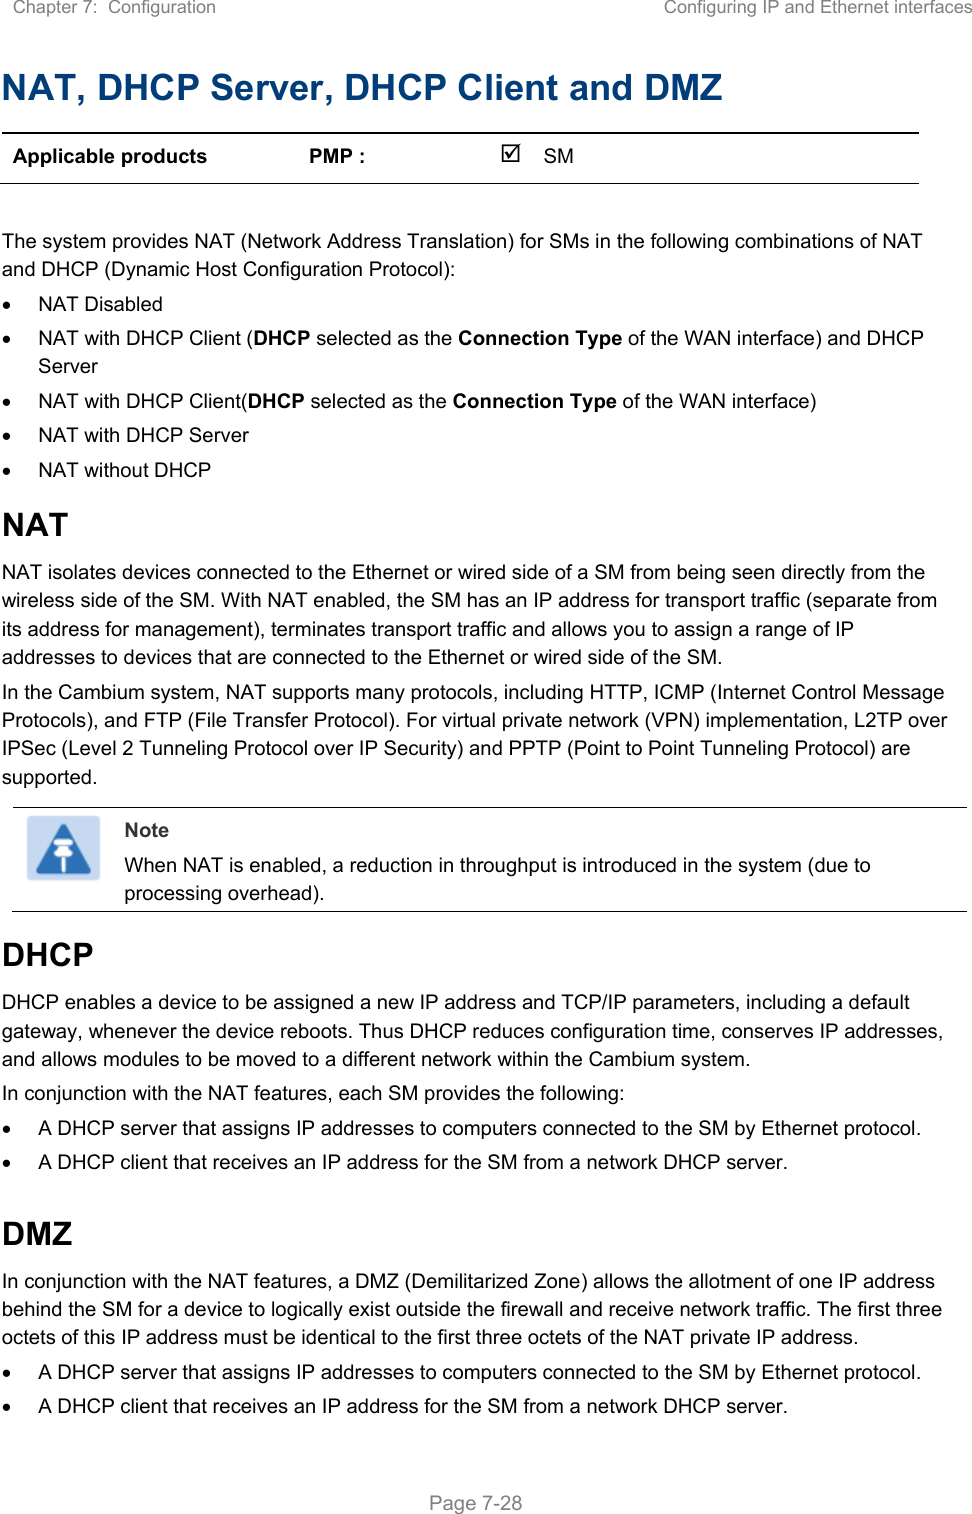 Chapter 7:  Configuration  Configuring IP and Ethernet interfaces   Page 7-28 NAT, DHCP Server, DHCP Client and DMZ Applicable products  PMP :    SM       The system provides NAT (Network Address Translation) for SMs in the following combinations of NAT and DHCP (Dynamic Host Configuration Protocol):   NAT Disabled   NAT with DHCP Client (DHCP selected as the Connection Type of the WAN interface) and DHCP Server   NAT with DHCP Client(DHCP selected as the Connection Type of the WAN interface)   NAT with DHCP Server   NAT without DHCP NAT NAT isolates devices connected to the Ethernet or wired side of a SM from being seen directly from the wireless side of the SM. With NAT enabled, the SM has an IP address for transport traffic (separate from its address for management), terminates transport traffic and allows you to assign a range of IP addresses to devices that are connected to the Ethernet or wired side of the SM.  In the Cambium system, NAT supports many protocols, including HTTP, ICMP (Internet Control Message Protocols), and FTP (File Transfer Protocol). For virtual private network (VPN) implementation, L2TP over IPSec (Level 2 Tunneling Protocol over IP Security) and PPTP (Point to Point Tunneling Protocol) are supported.   Note When NAT is enabled, a reduction in throughput is introduced in the system (due to processing overhead). DHCP DHCP enables a device to be assigned a new IP address and TCP/IP parameters, including a default gateway, whenever the device reboots. Thus DHCP reduces configuration time, conserves IP addresses, and allows modules to be moved to a different network within the Cambium system. In conjunction with the NAT features, each SM provides the following:   A DHCP server that assigns IP addresses to computers connected to the SM by Ethernet protocol.   A DHCP client that receives an IP address for the SM from a network DHCP server.  DMZ In conjunction with the NAT features, a DMZ (Demilitarized Zone) allows the allotment of one IP address behind the SM for a device to logically exist outside the firewall and receive network traffic. The first three octets of this IP address must be identical to the first three octets of the NAT private IP address.    A DHCP server that assigns IP addresses to computers connected to the SM by Ethernet protocol.   A DHCP client that receives an IP address for the SM from a network DHCP server. 